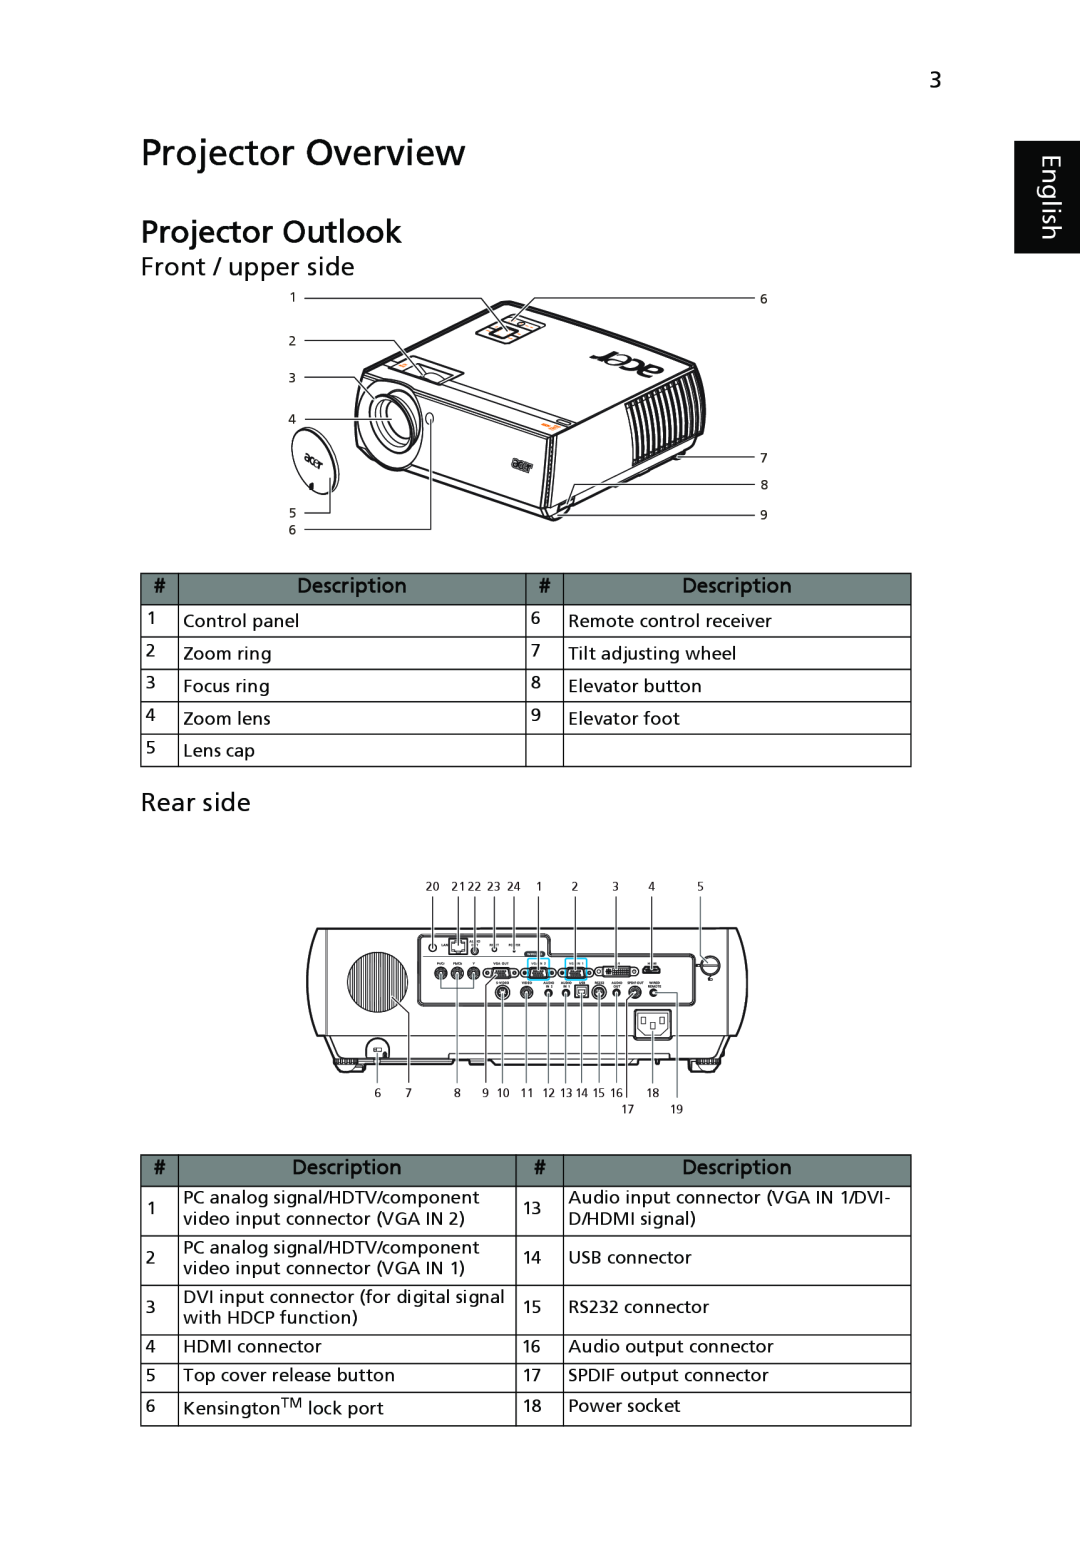 Acer P7280, P7270i manual Projector Overview, Projector Outlook, Front / upper side, Rear side, English, Description 